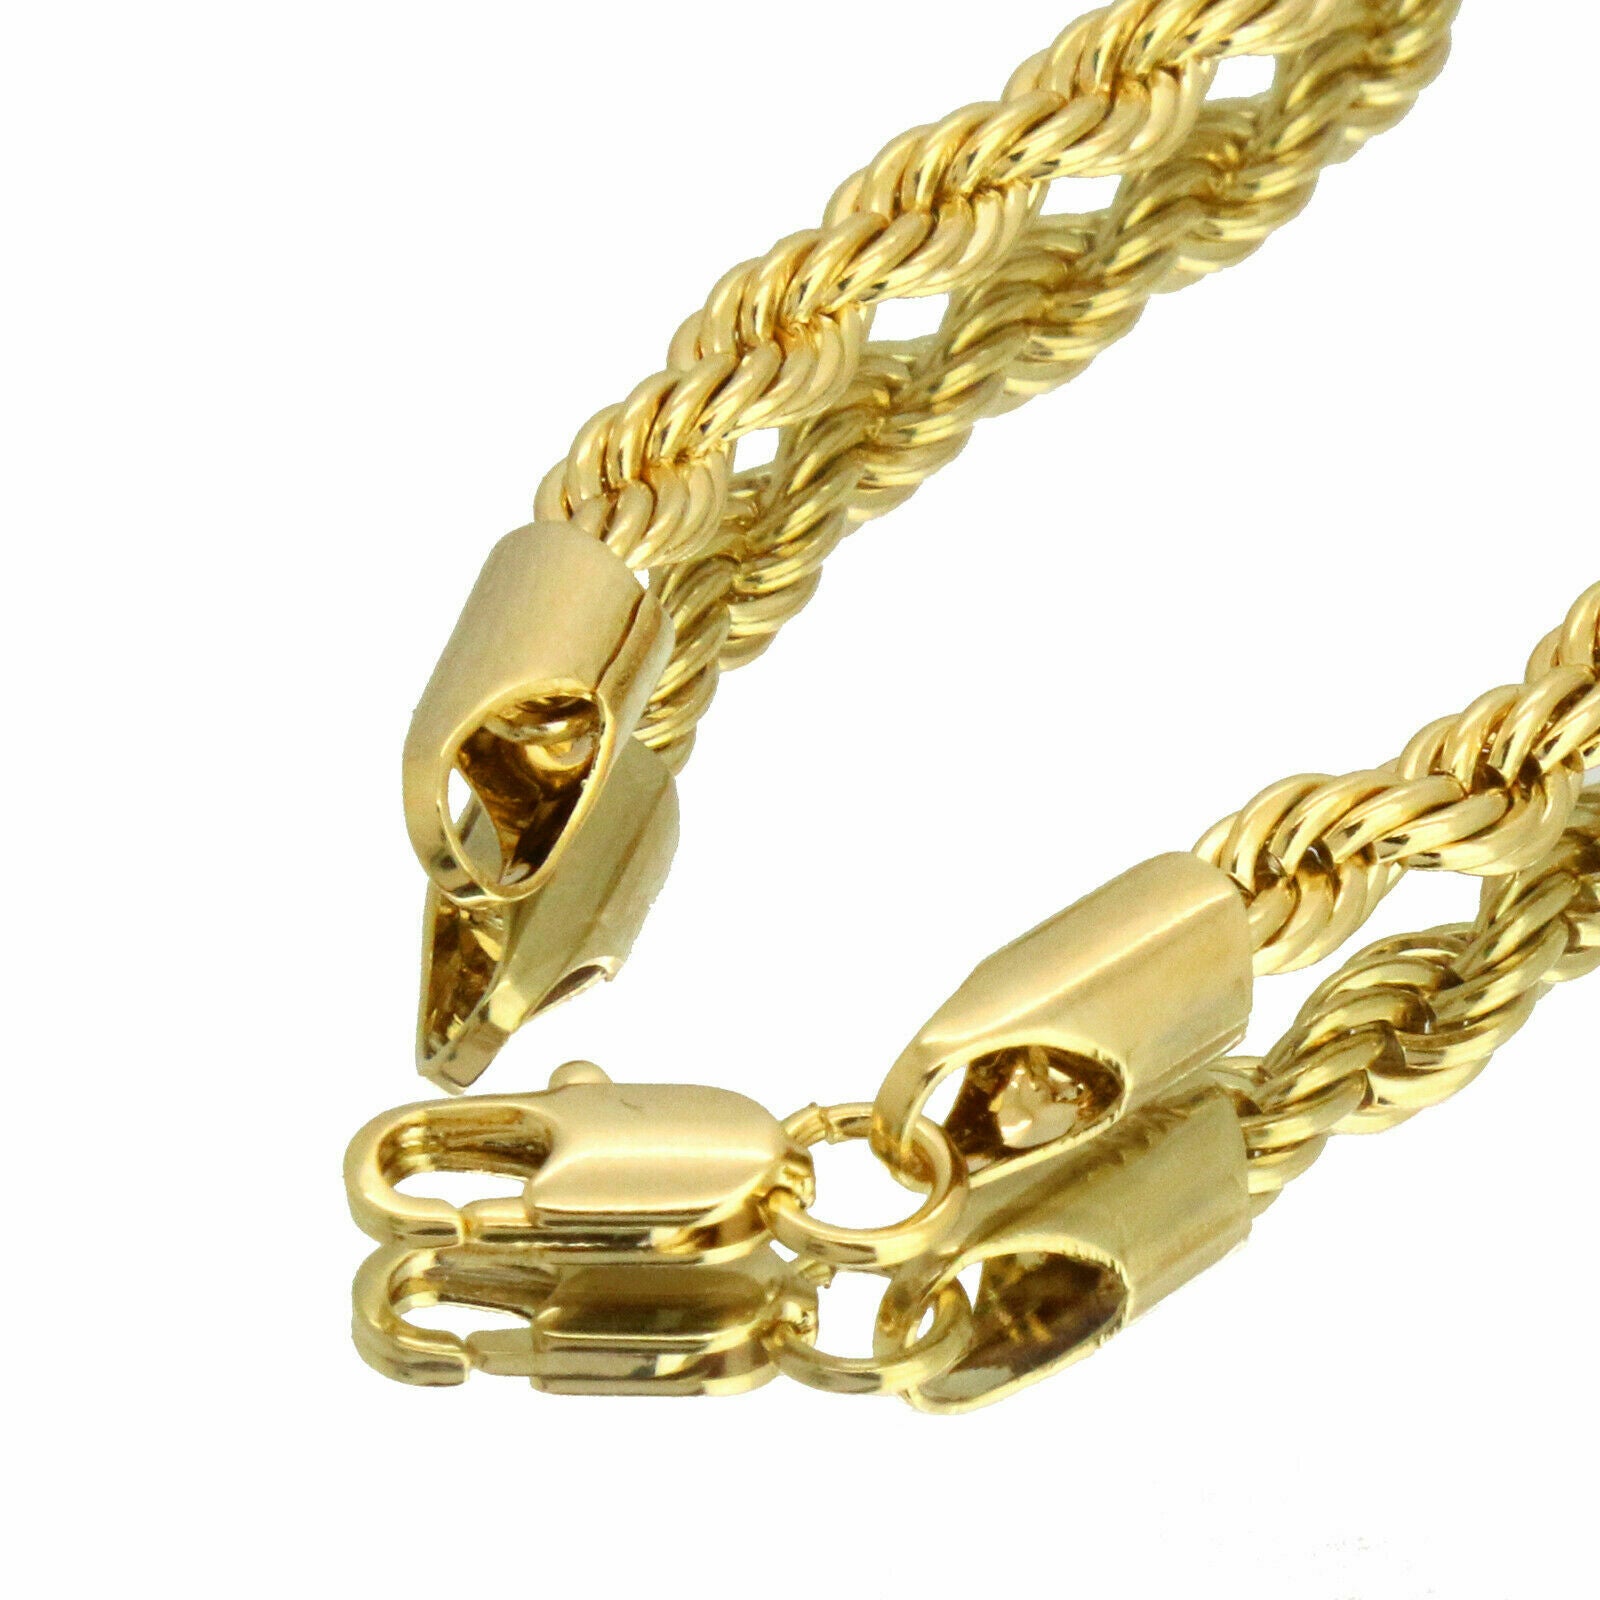 Bag Of Money Pendant 24" Rope Chain Hip Hop Style 18k Gold Plated Necklace